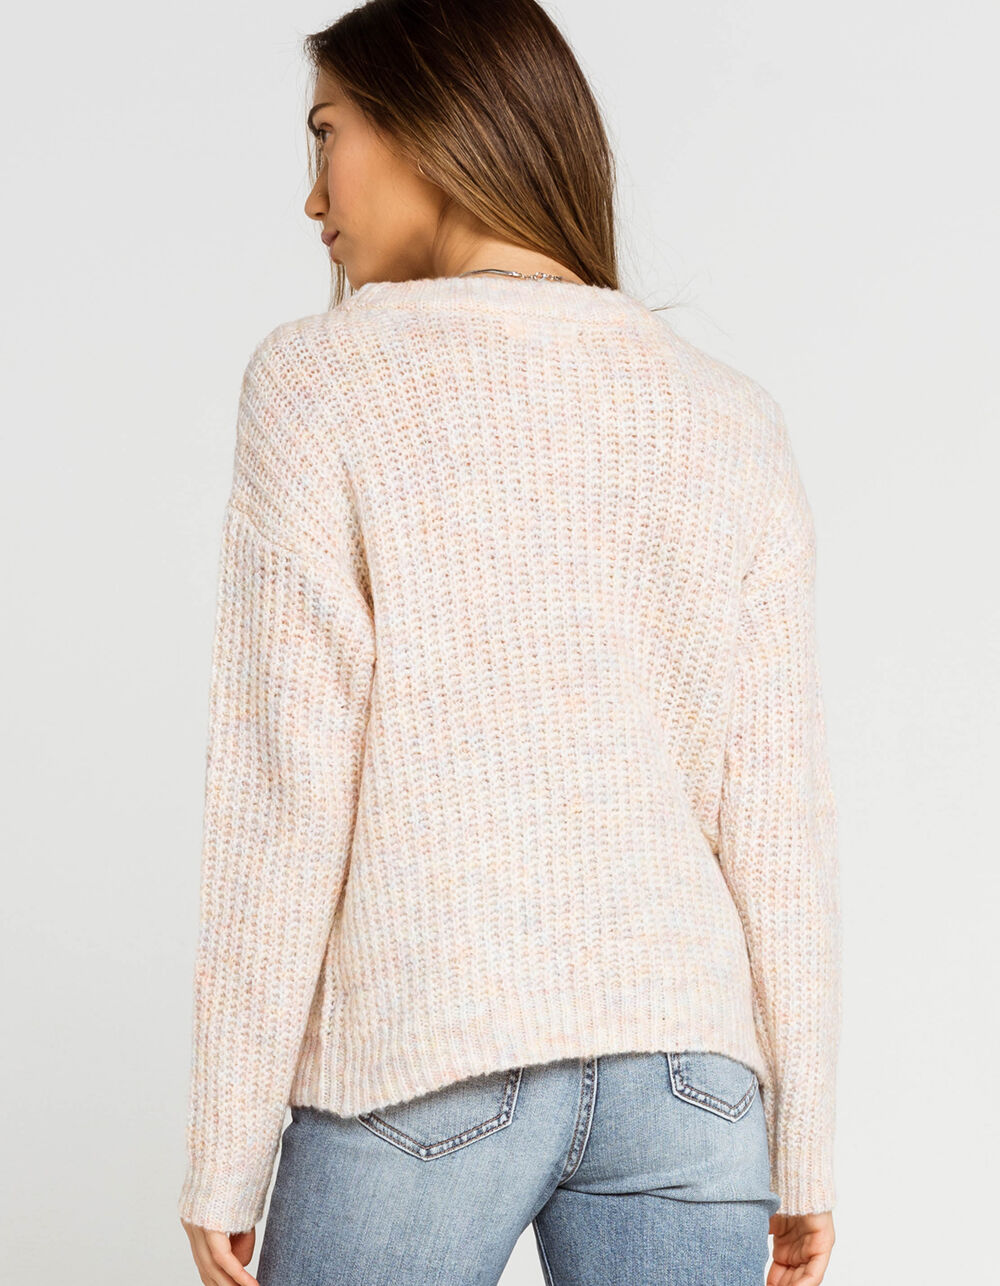 FULL CIRCLE TRENDS Space Dye Womens Sweater - IVORY COMBO | Tillys